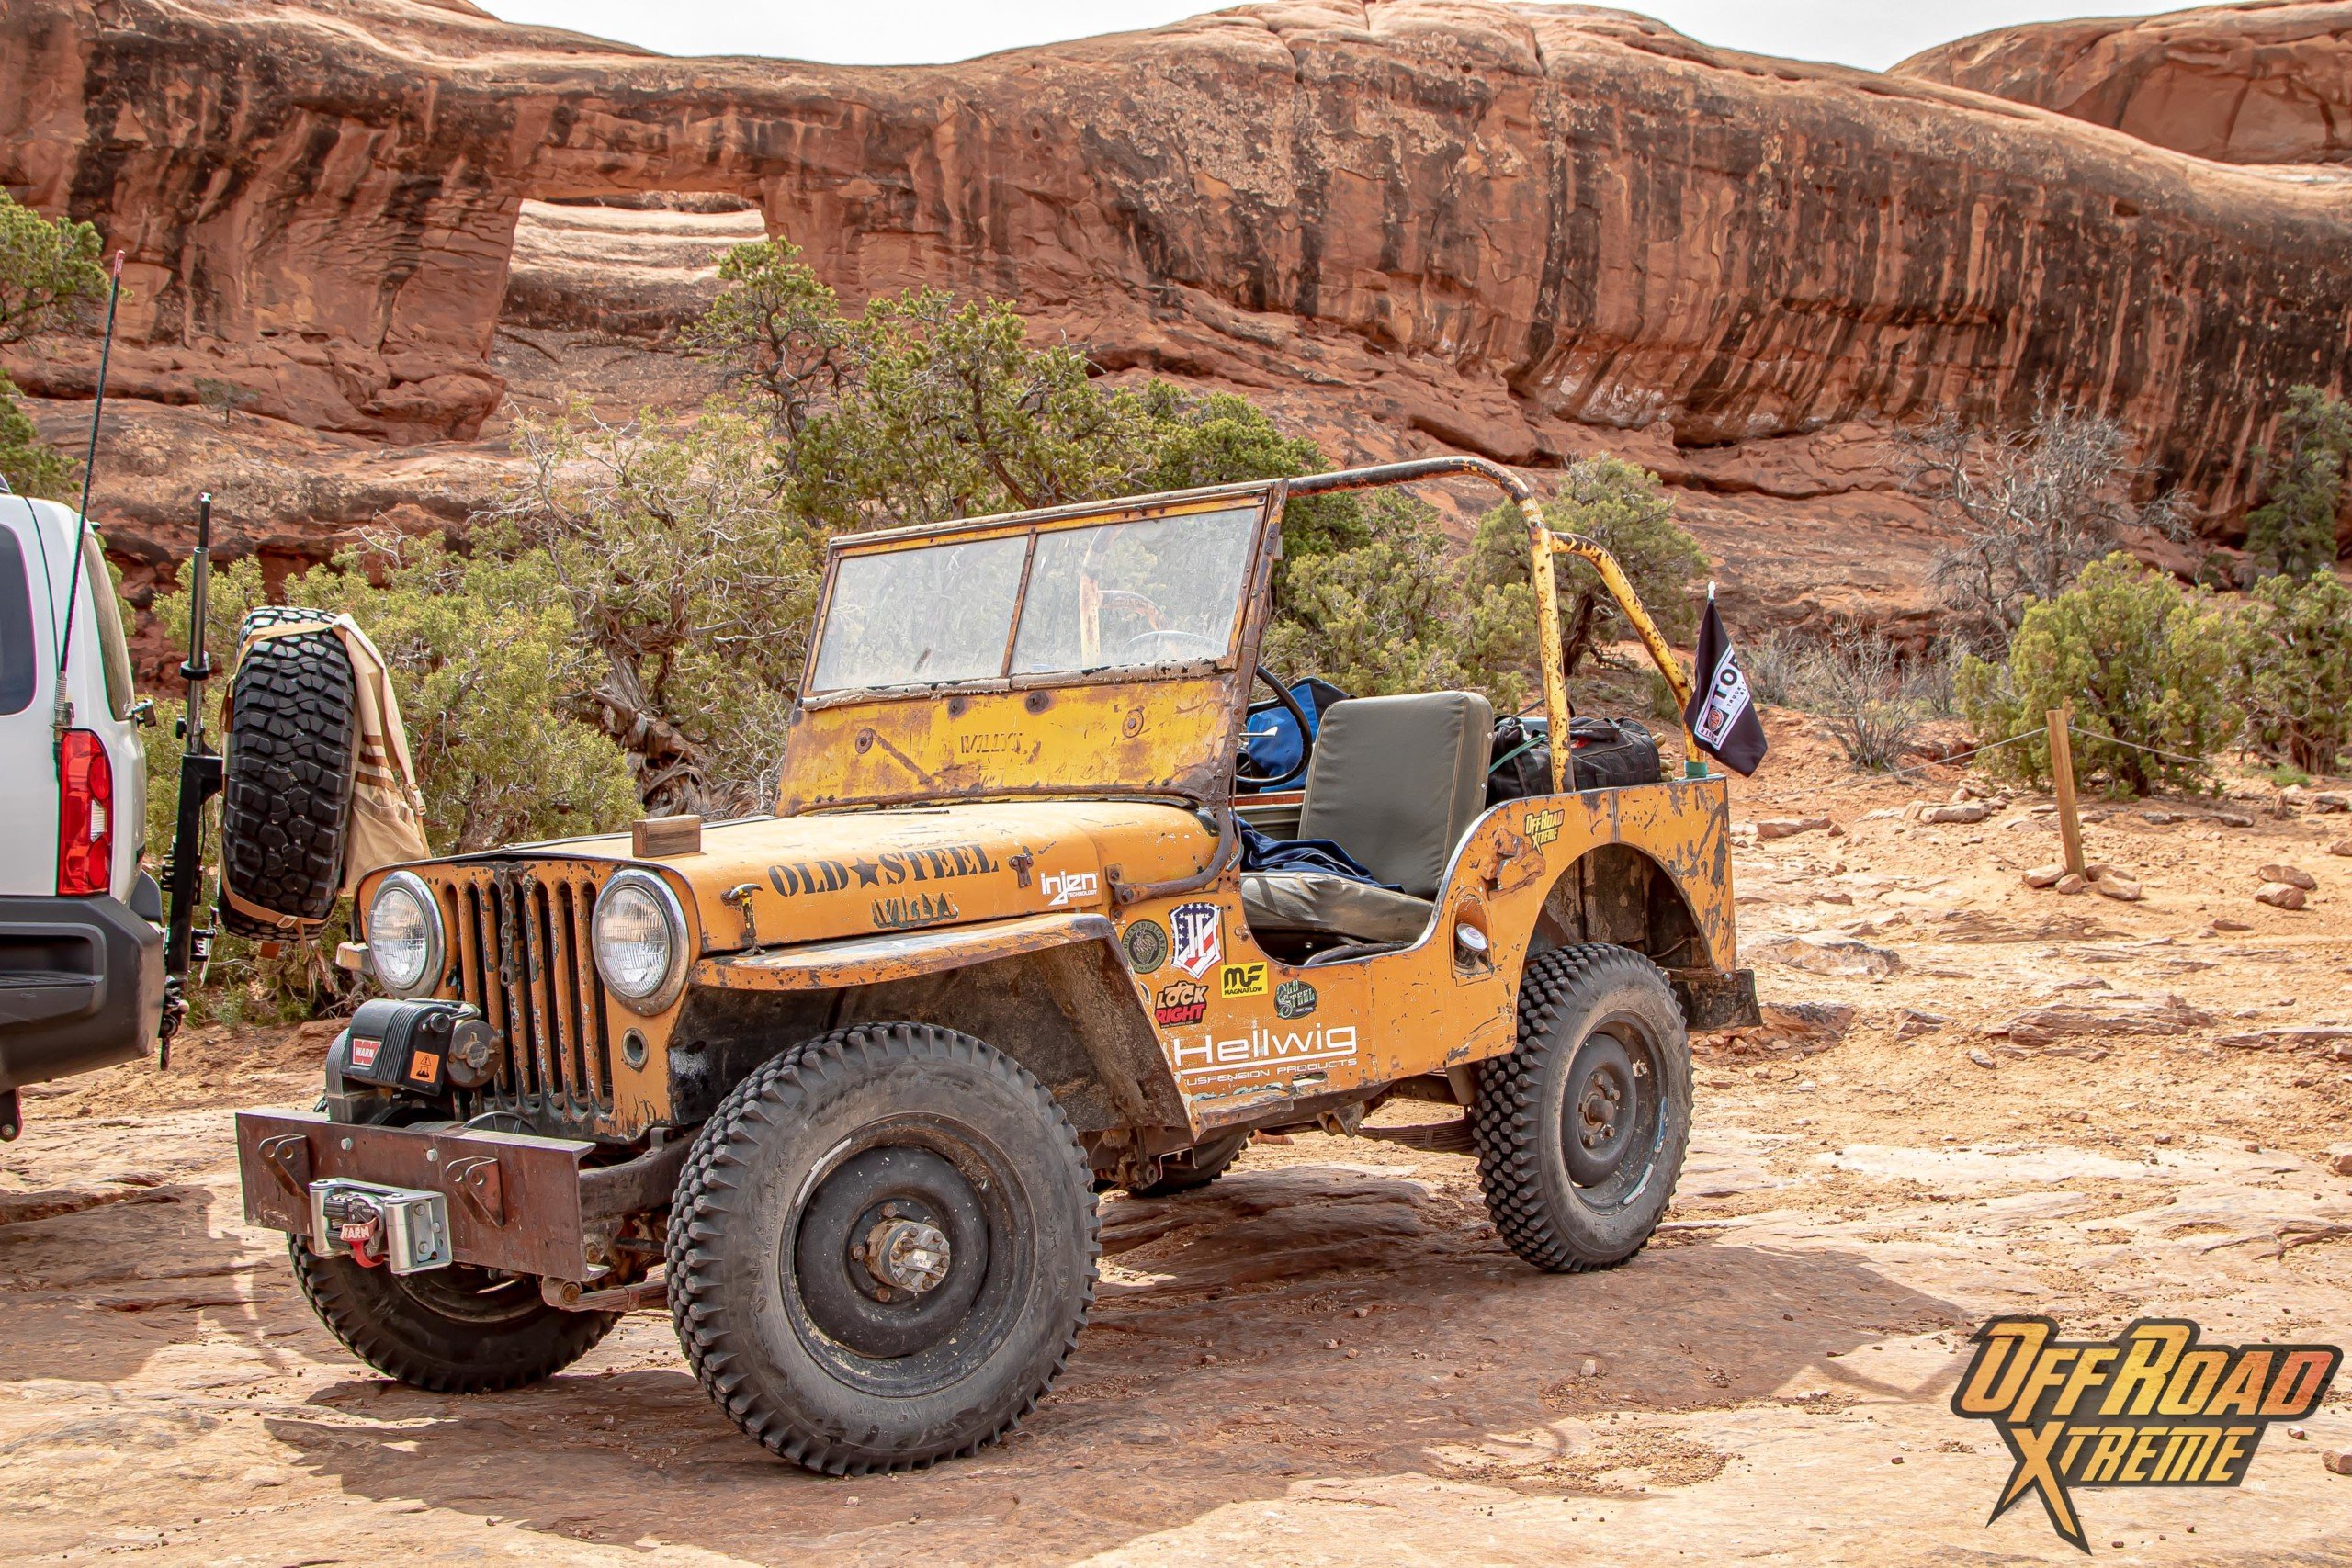 Mike Hallmark’s Rustic And Rugged 1948 Jeep CJ-2A “Willis” Lives On